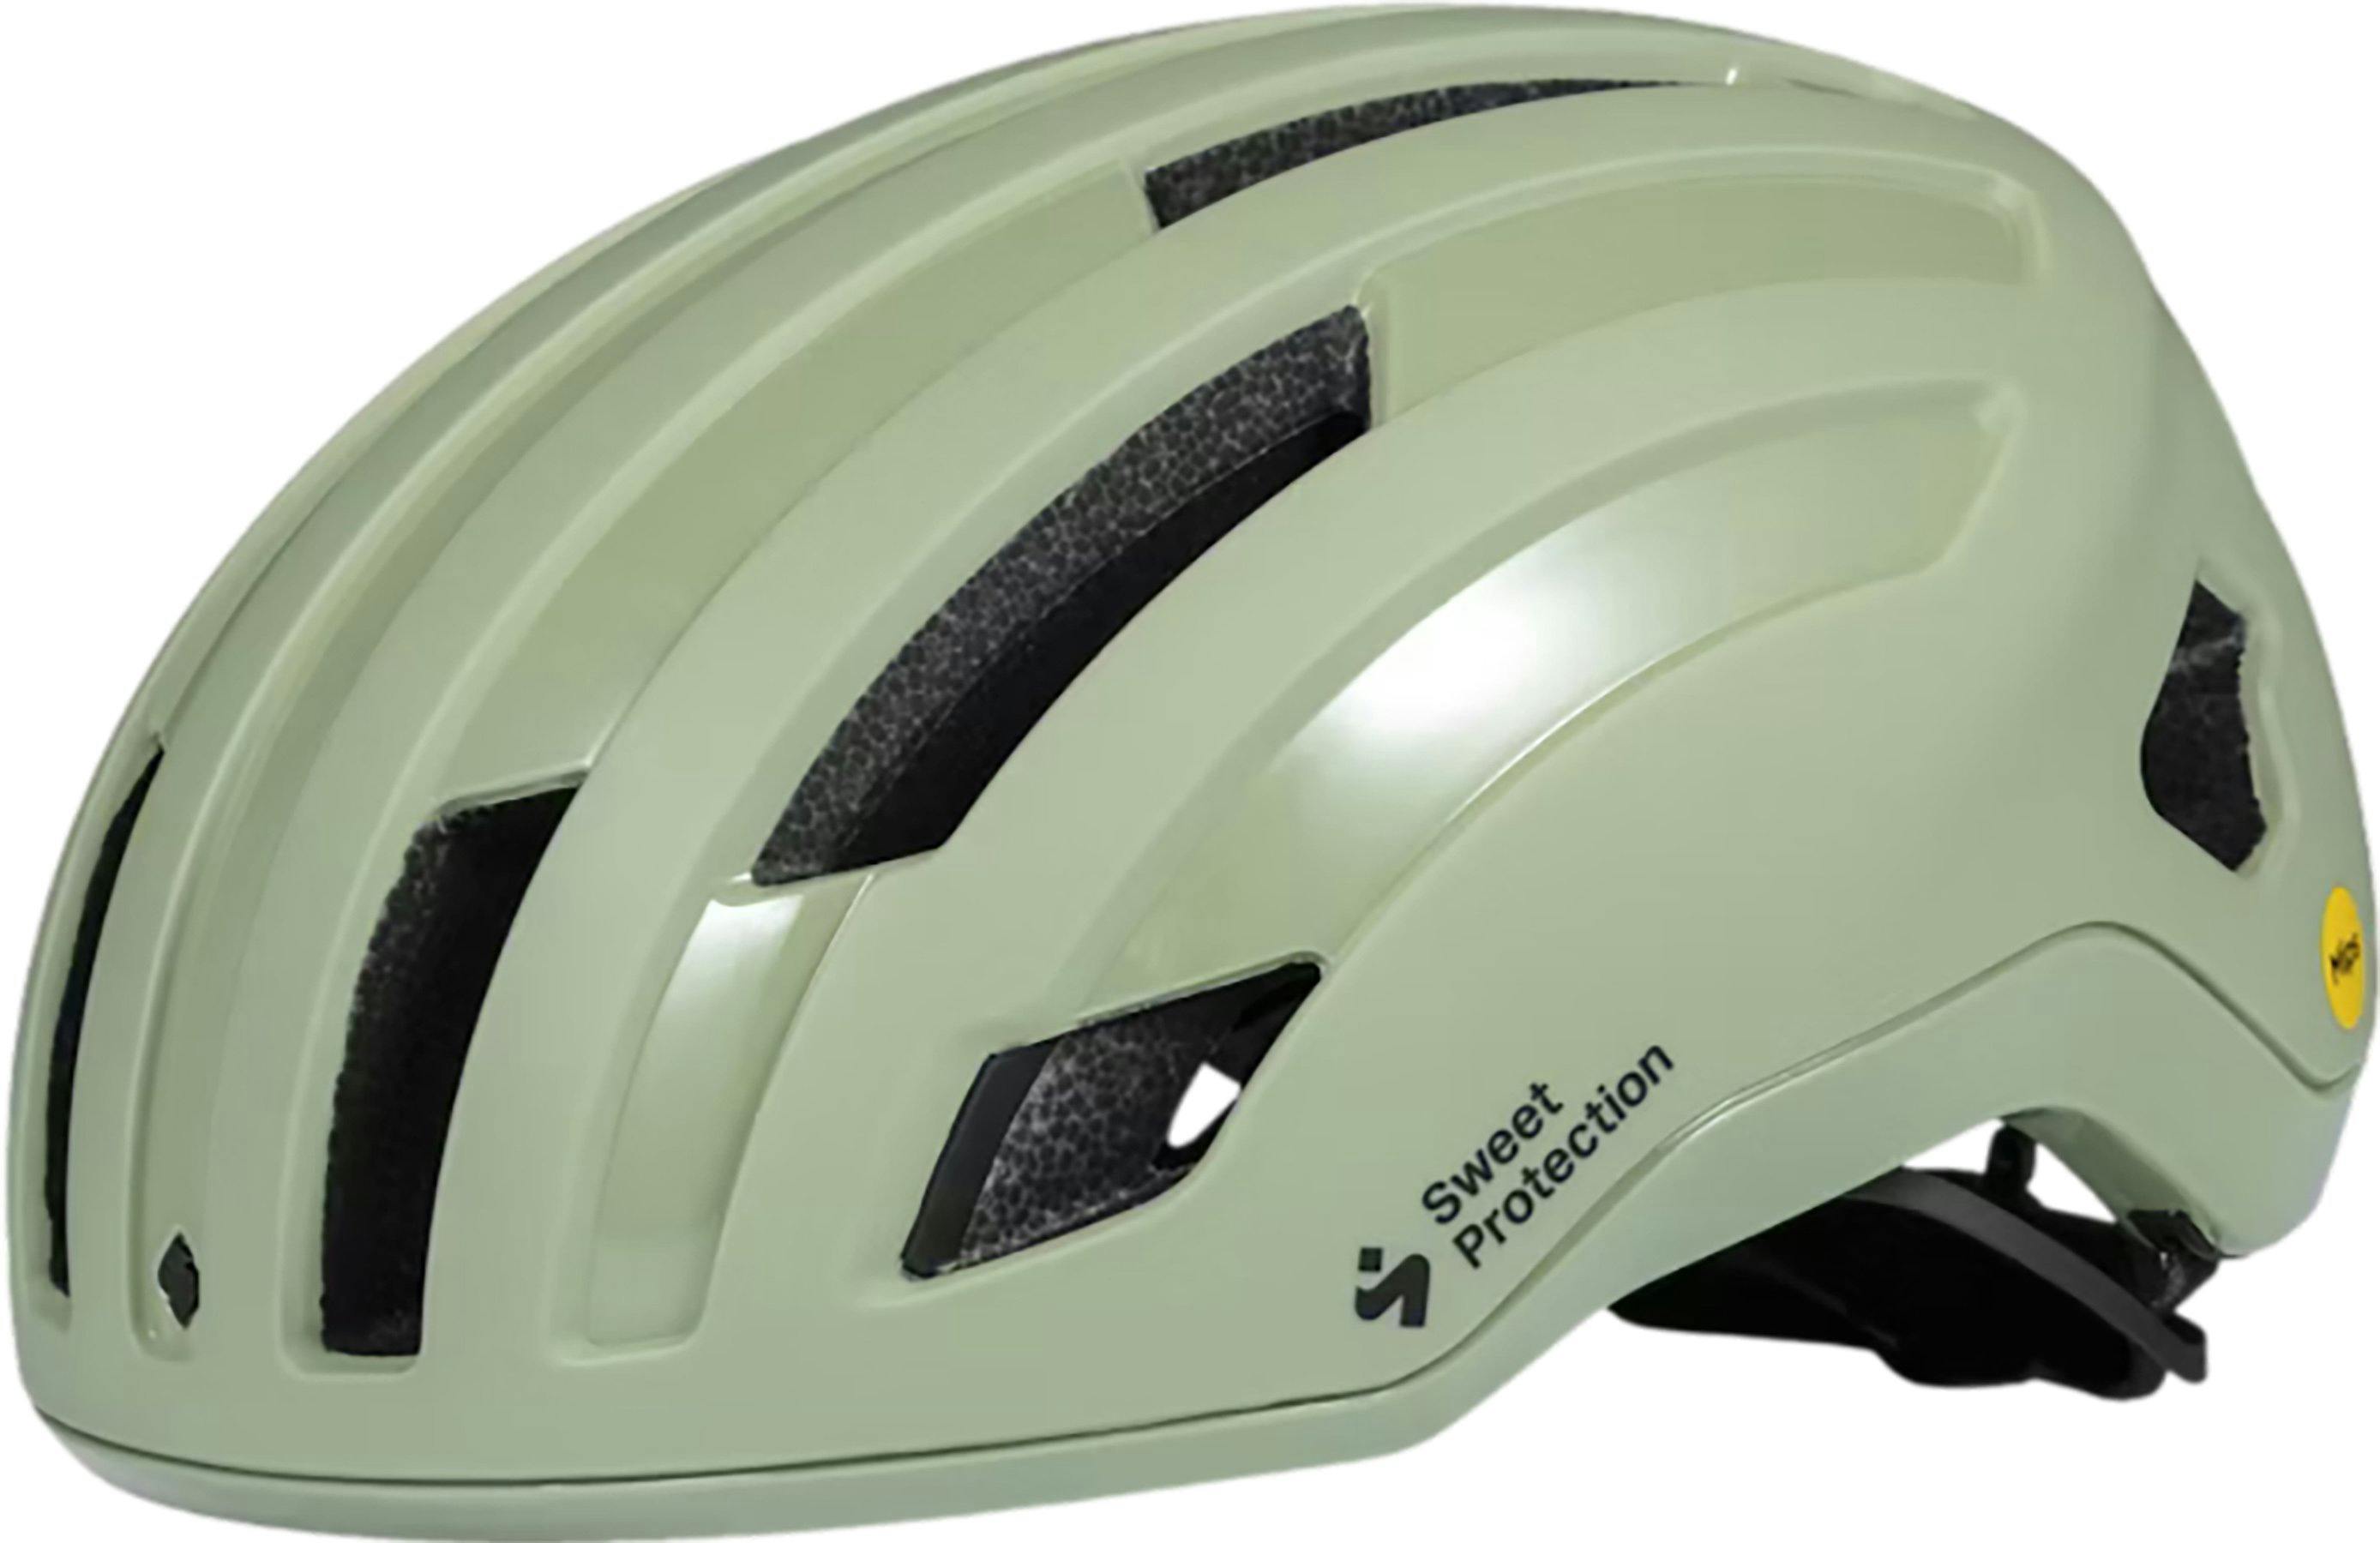 Product image for Outrider MIPS Helmet - Unisex